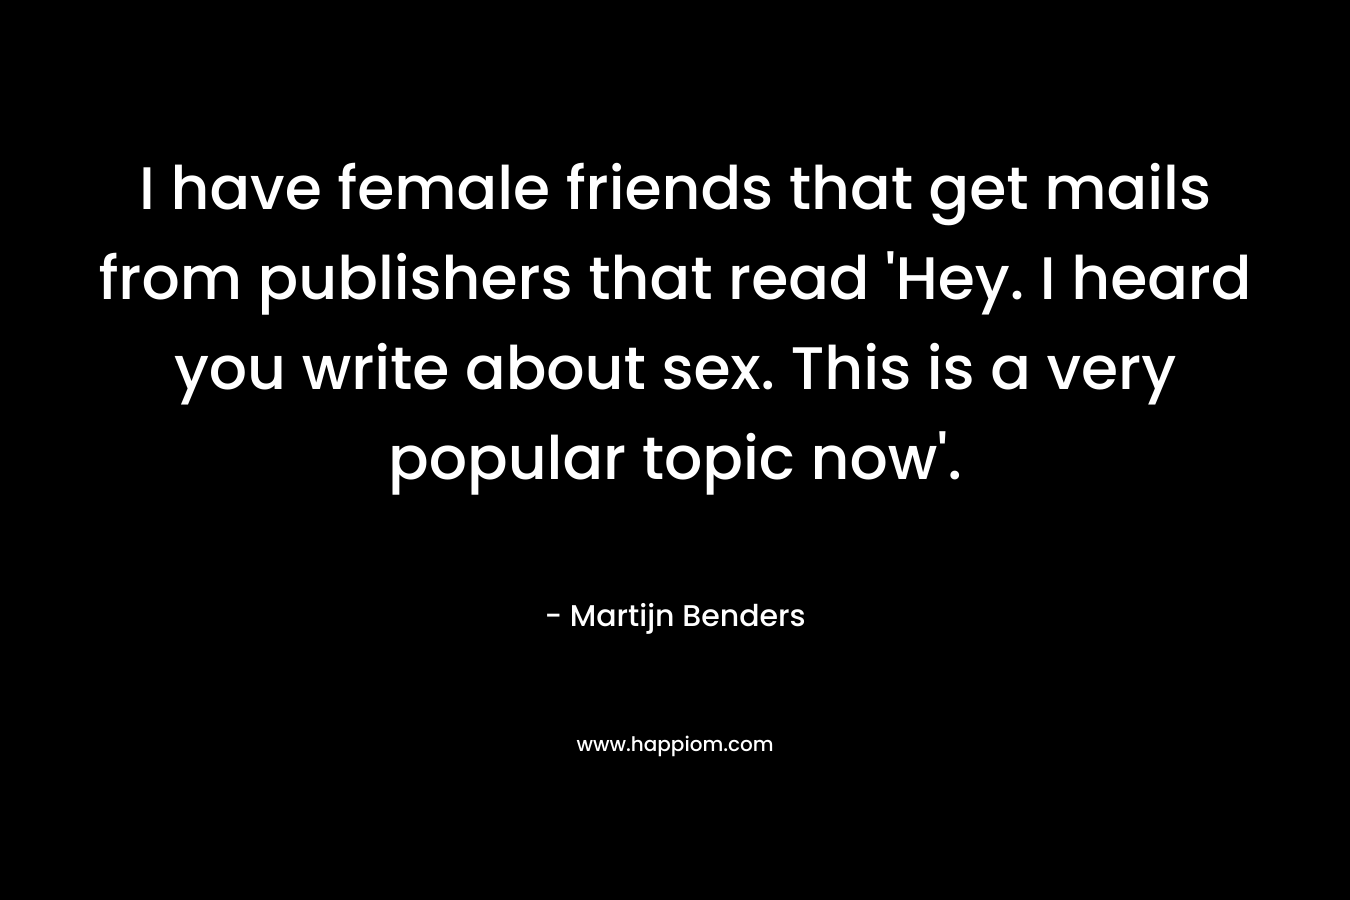 I have female friends that get mails from publishers that read ‘Hey. I heard you write about sex. This is a very popular topic now’. – Martijn Benders